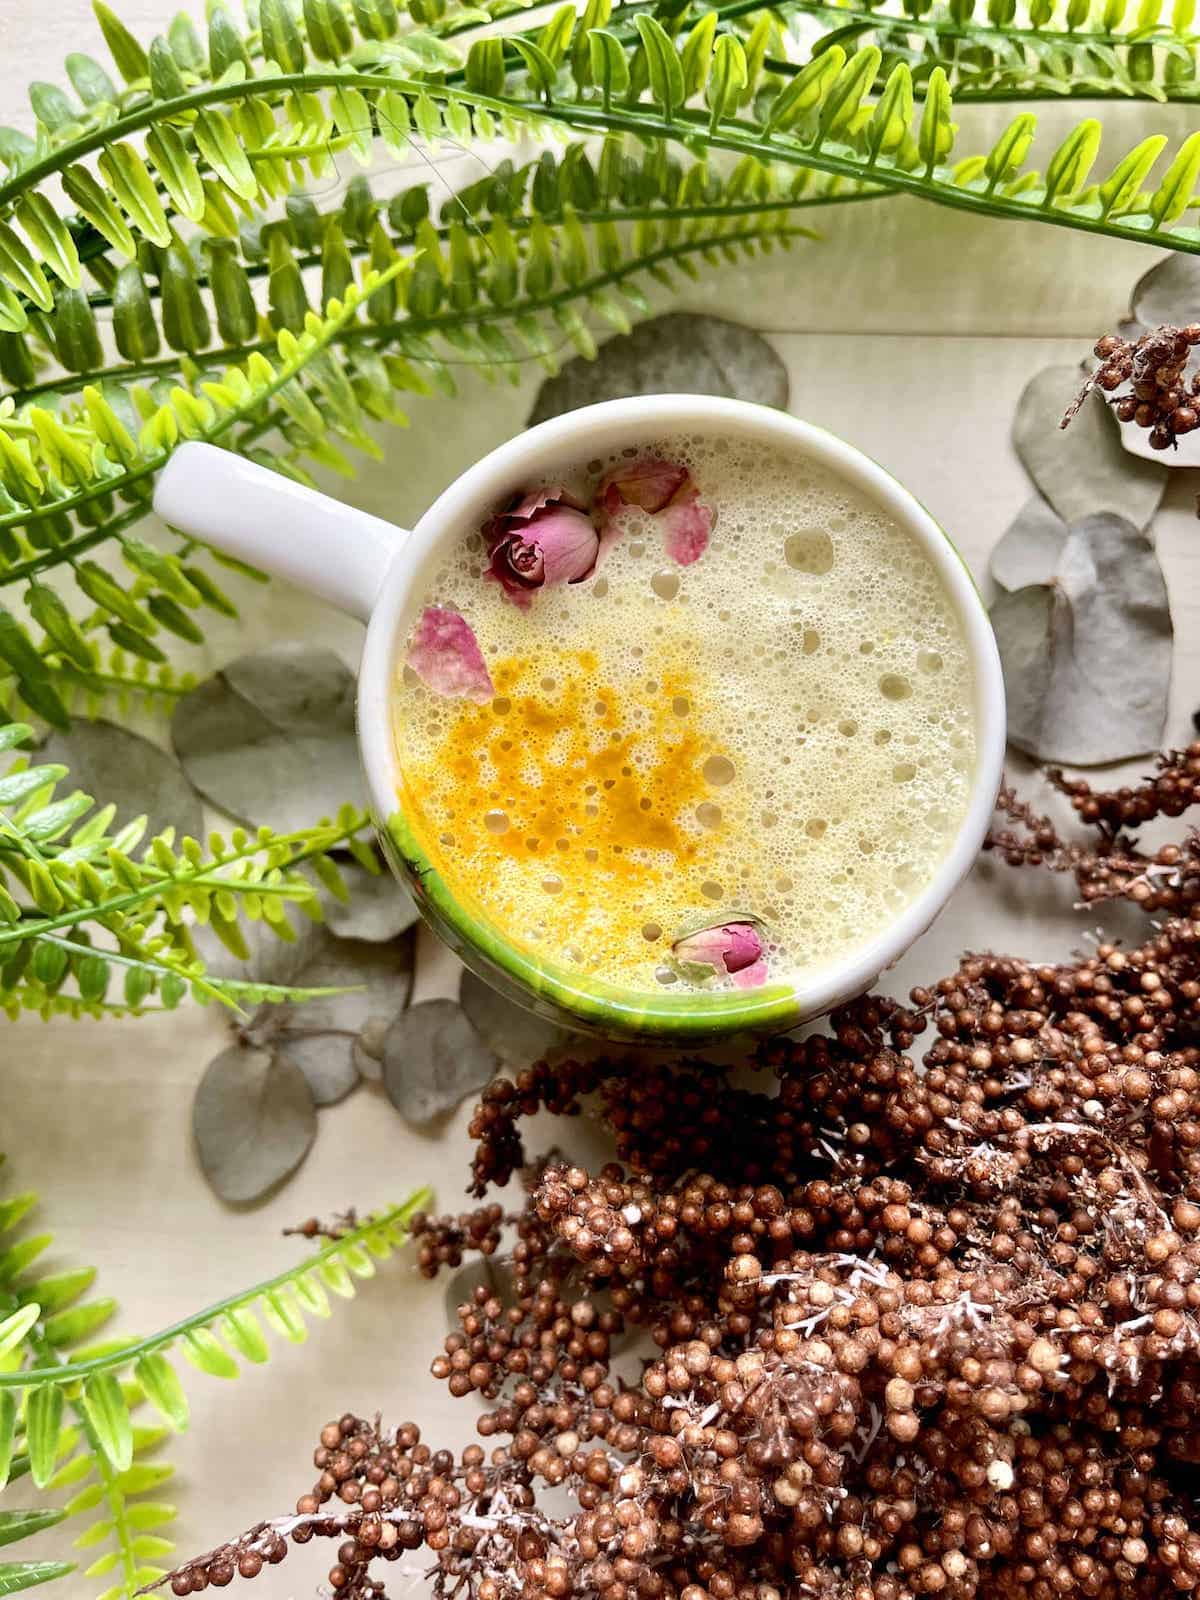 A cup of Golden Turmeric Chai Latte with Rosesbuds on a foamy top.